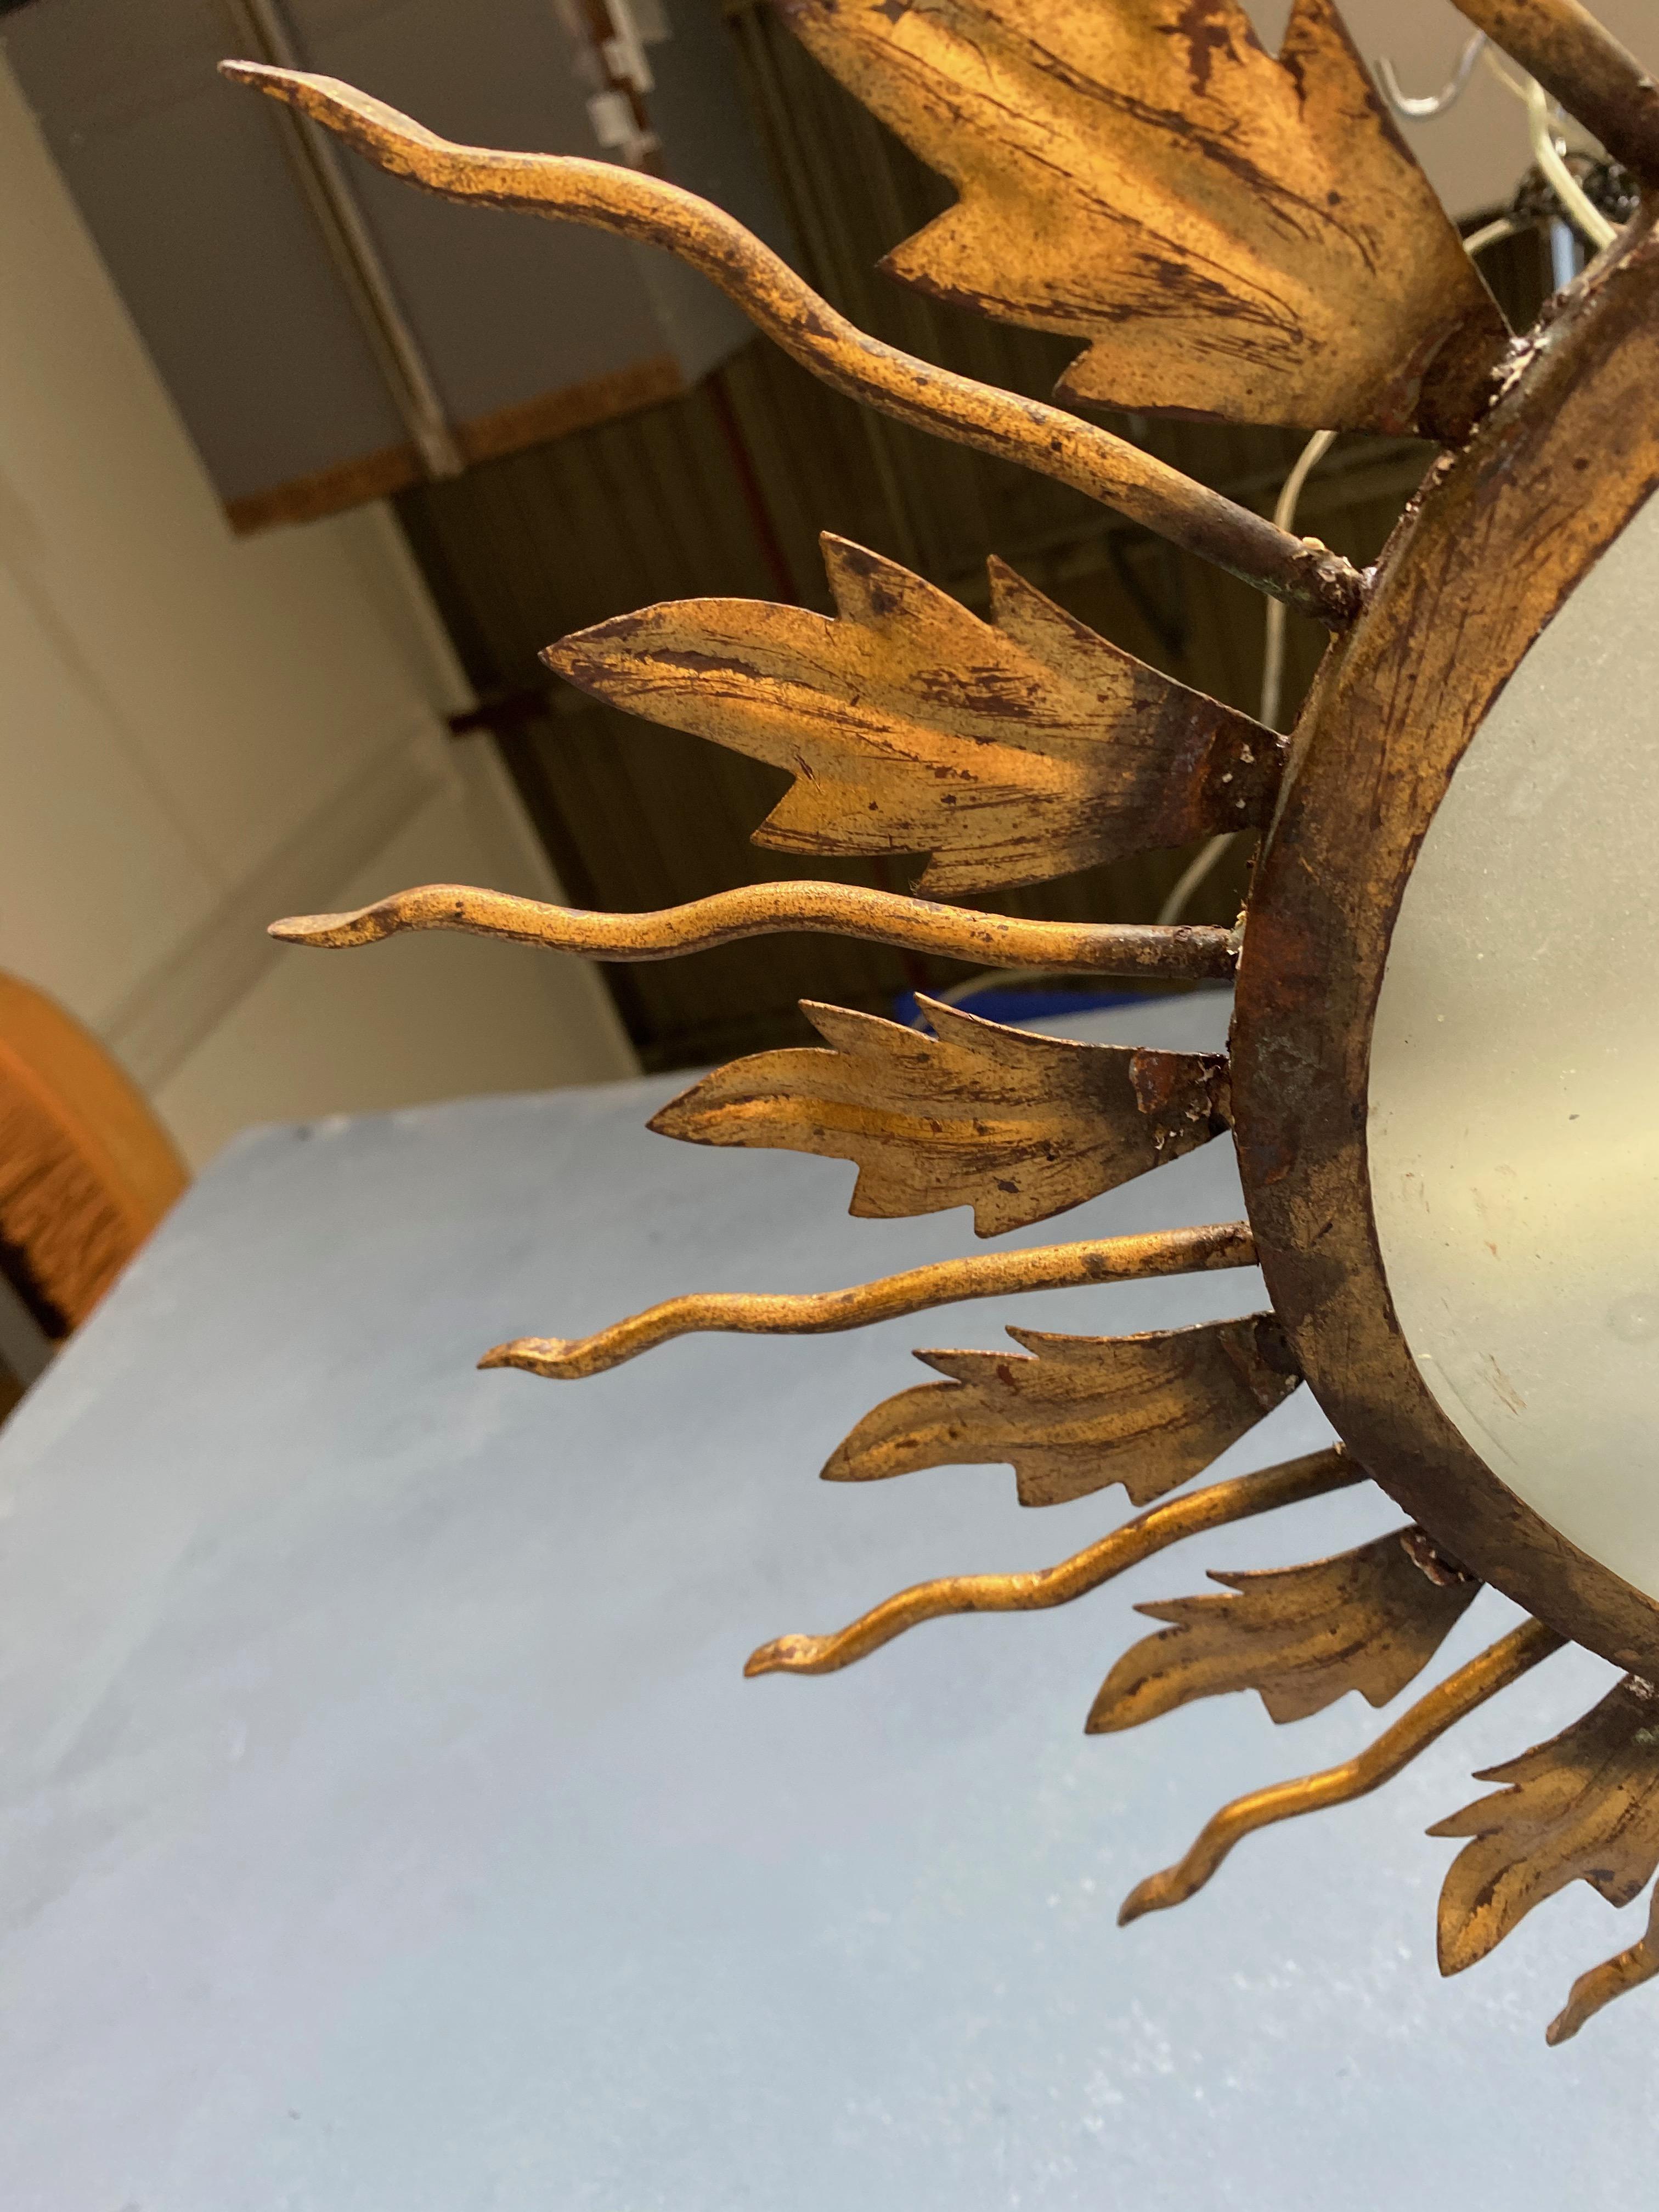 Mid-20th Century Gilt Metal Flush Mount Ceiling Fixture with Leaves and Rays